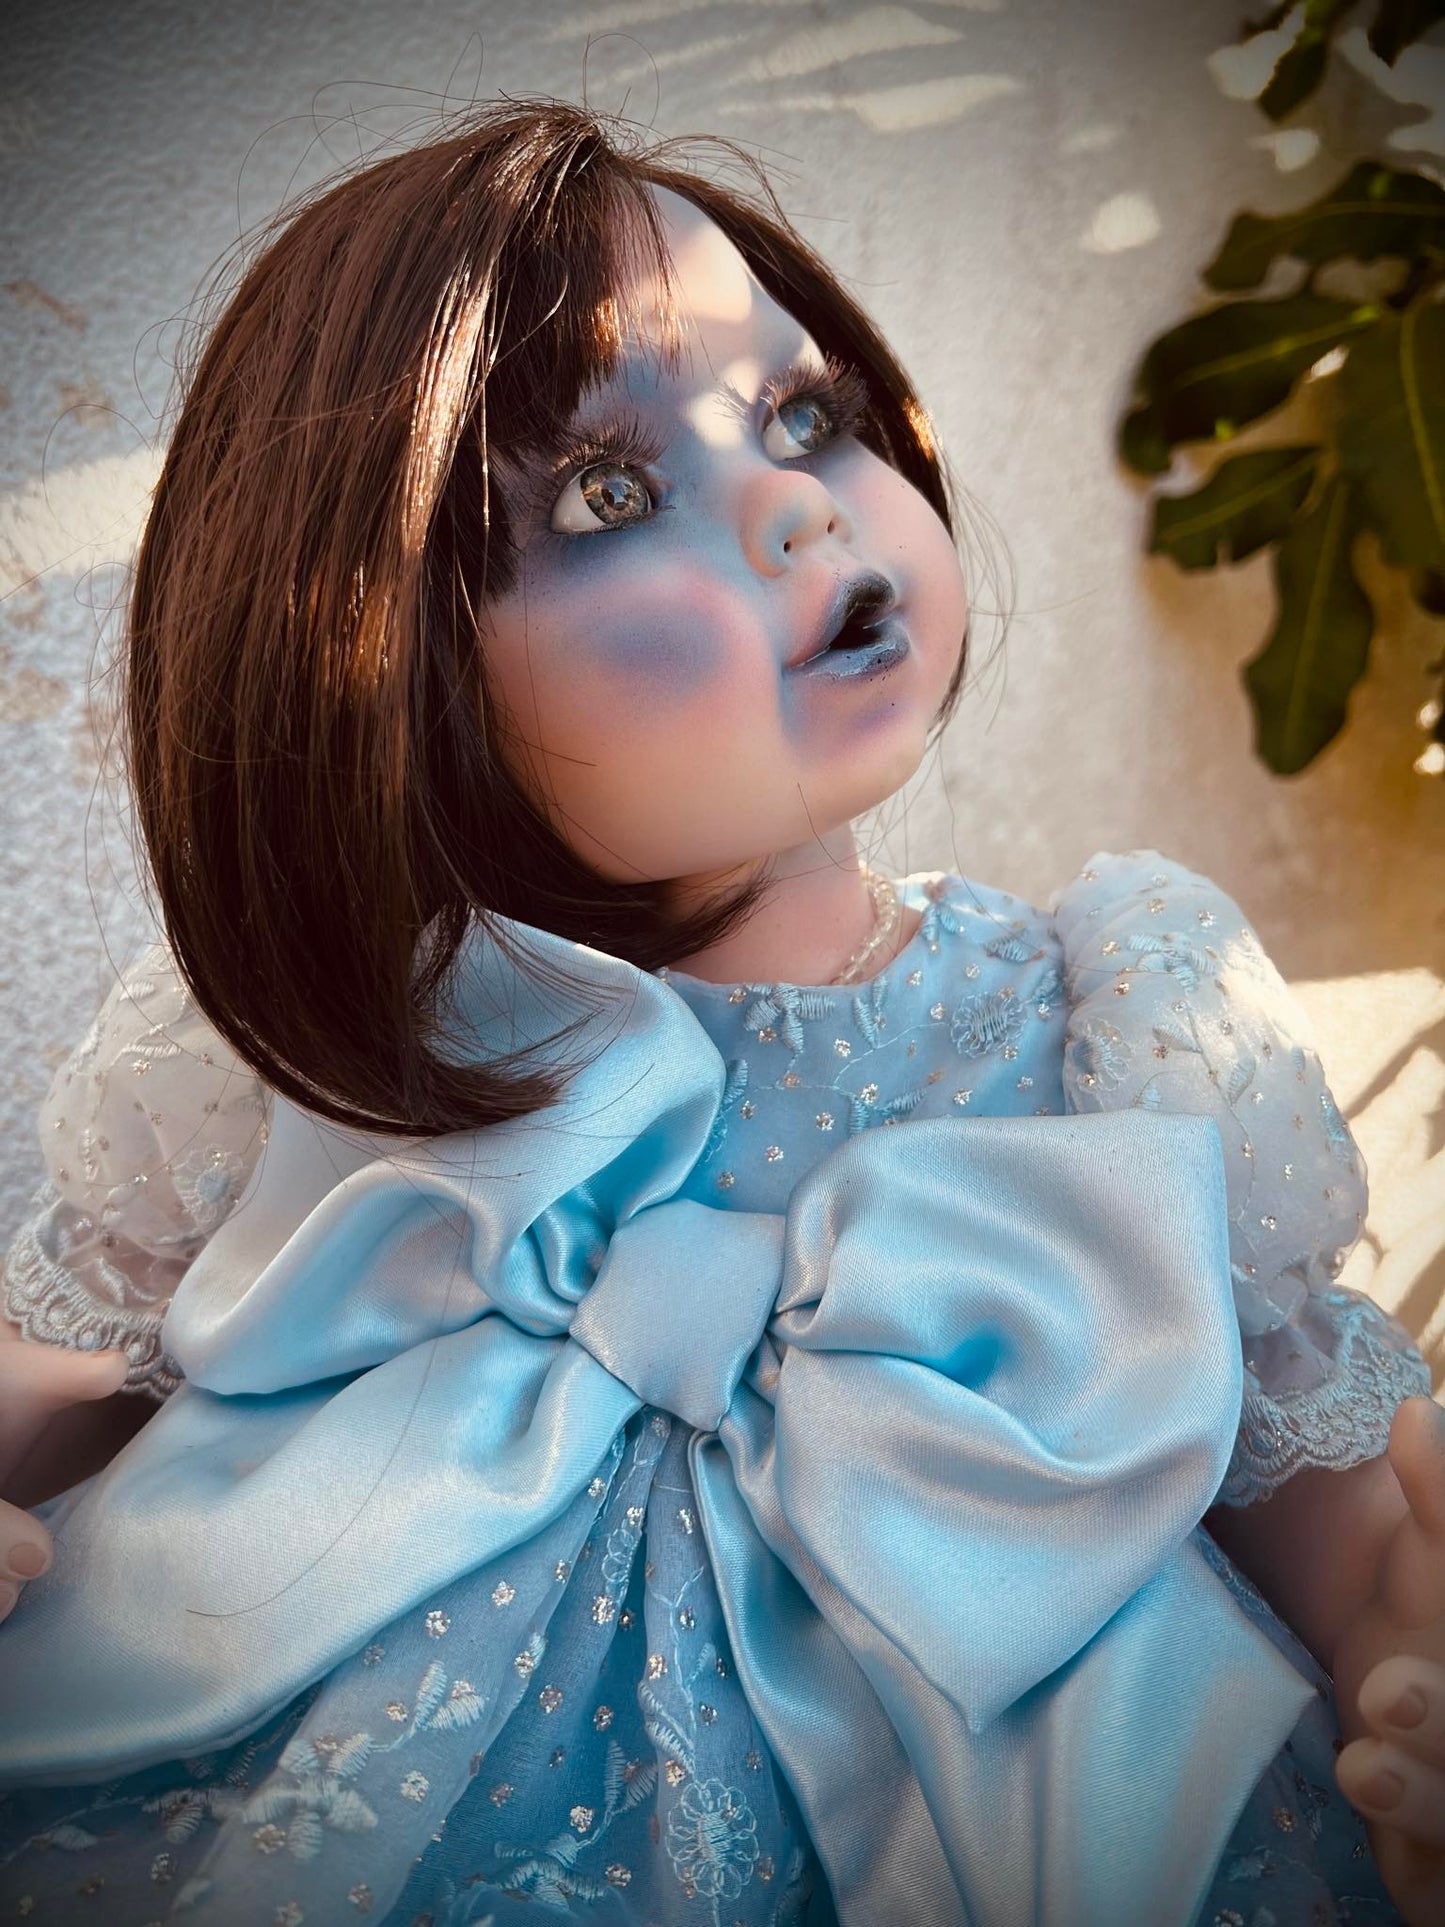 Meet Cassandra 20" Doll Porcelain Zombie Undead Witchy Creepy Haunted Spirit Infected Scary Spooky Possessed Positive Oddity Gift Idea